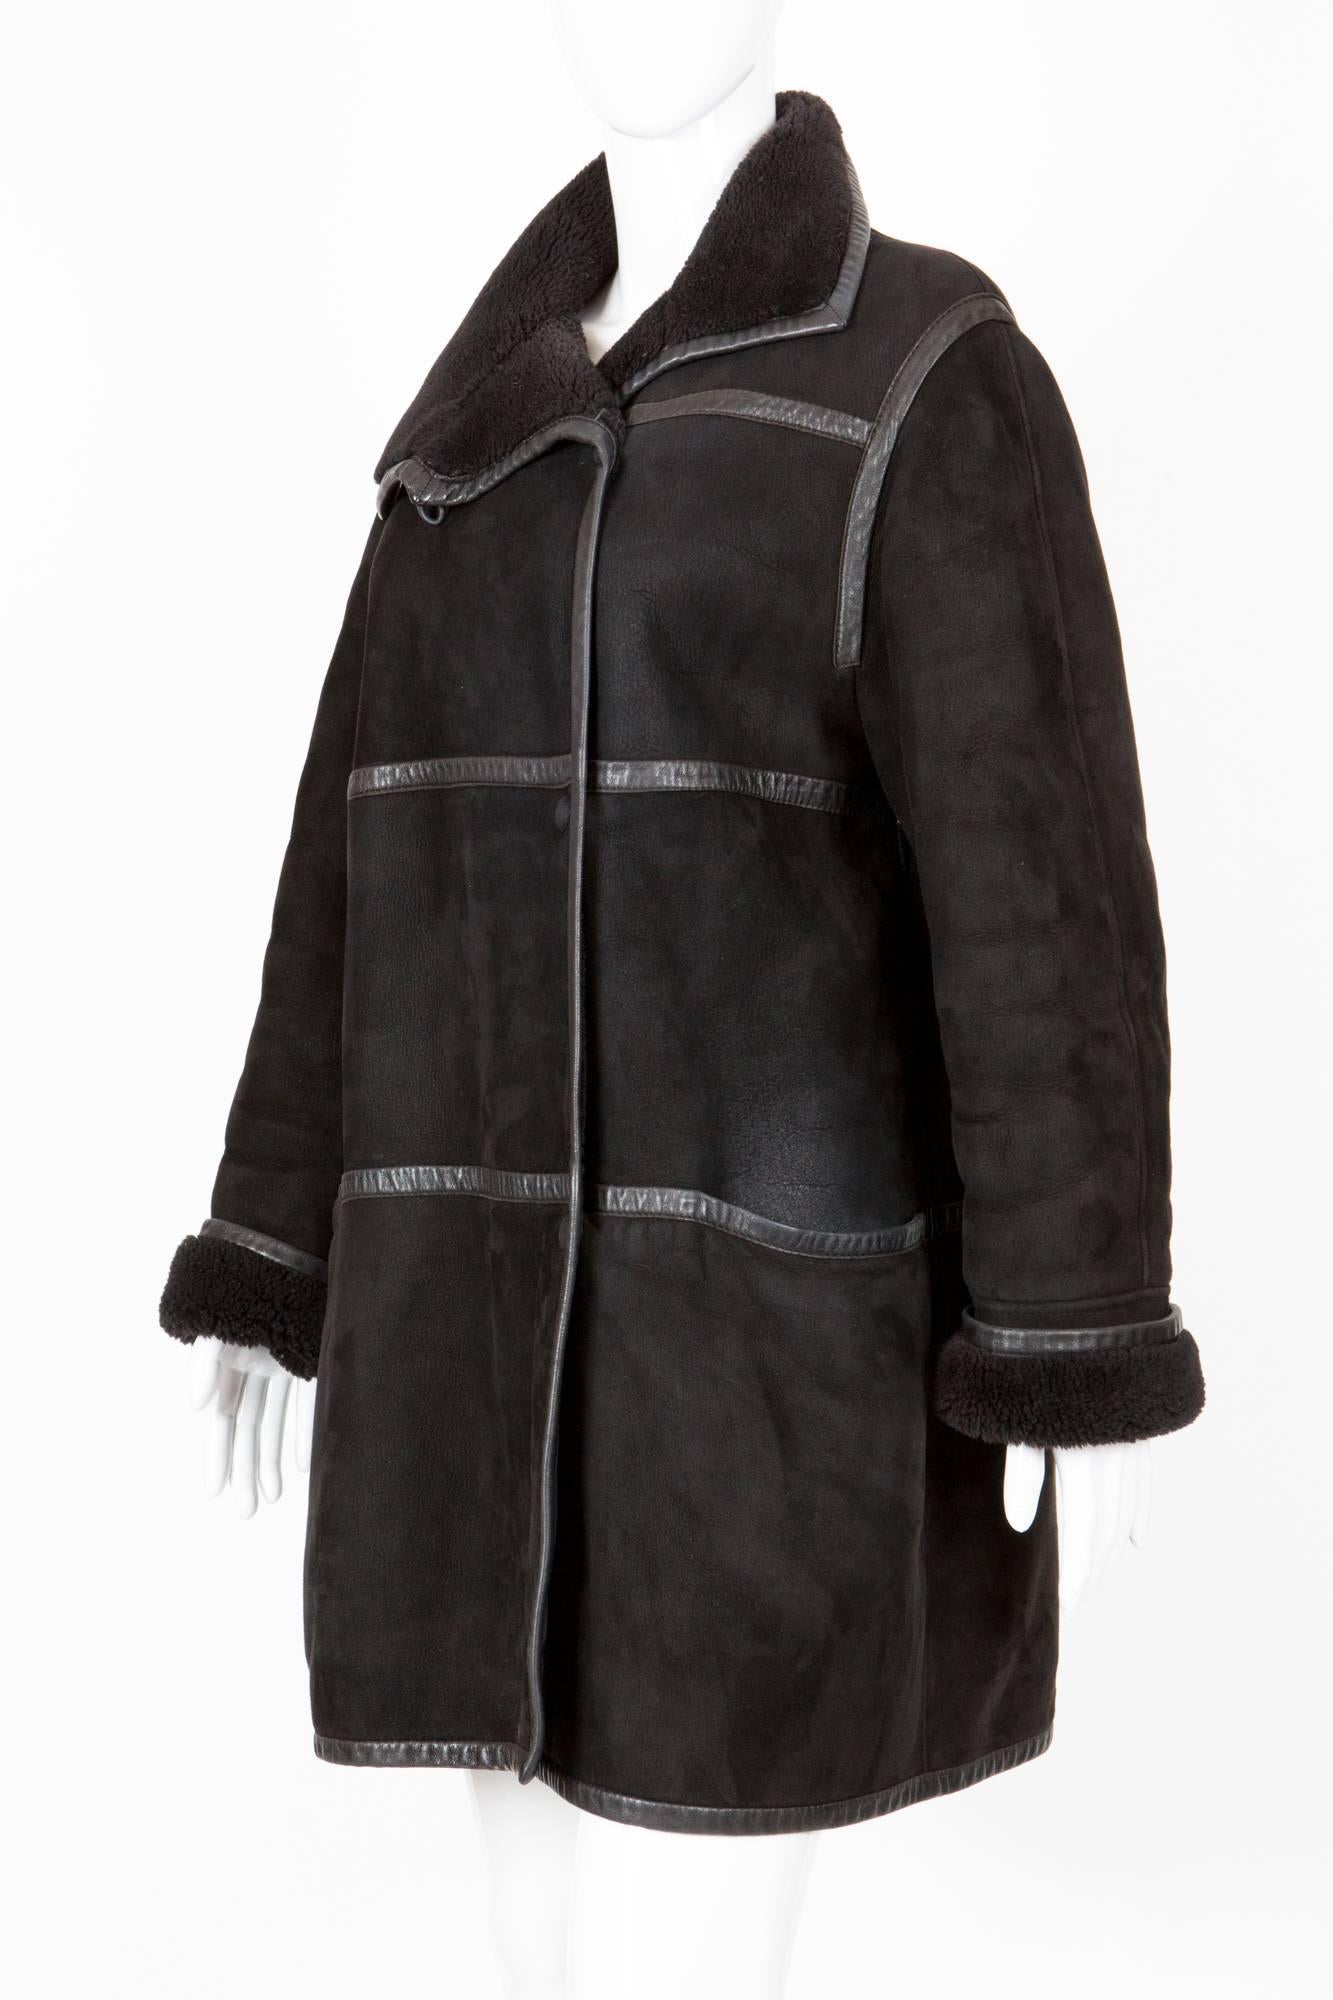 1980s gorgeous Courrèges 100% black calf leather shearling coat featuring black leather straps,snaps front opening, pockets in bands. 
In good vintage condition. Made in France. 
Estimated size Medium - 38fr/US6 /UK10 and 40fr/US8/UK12
We guarantee